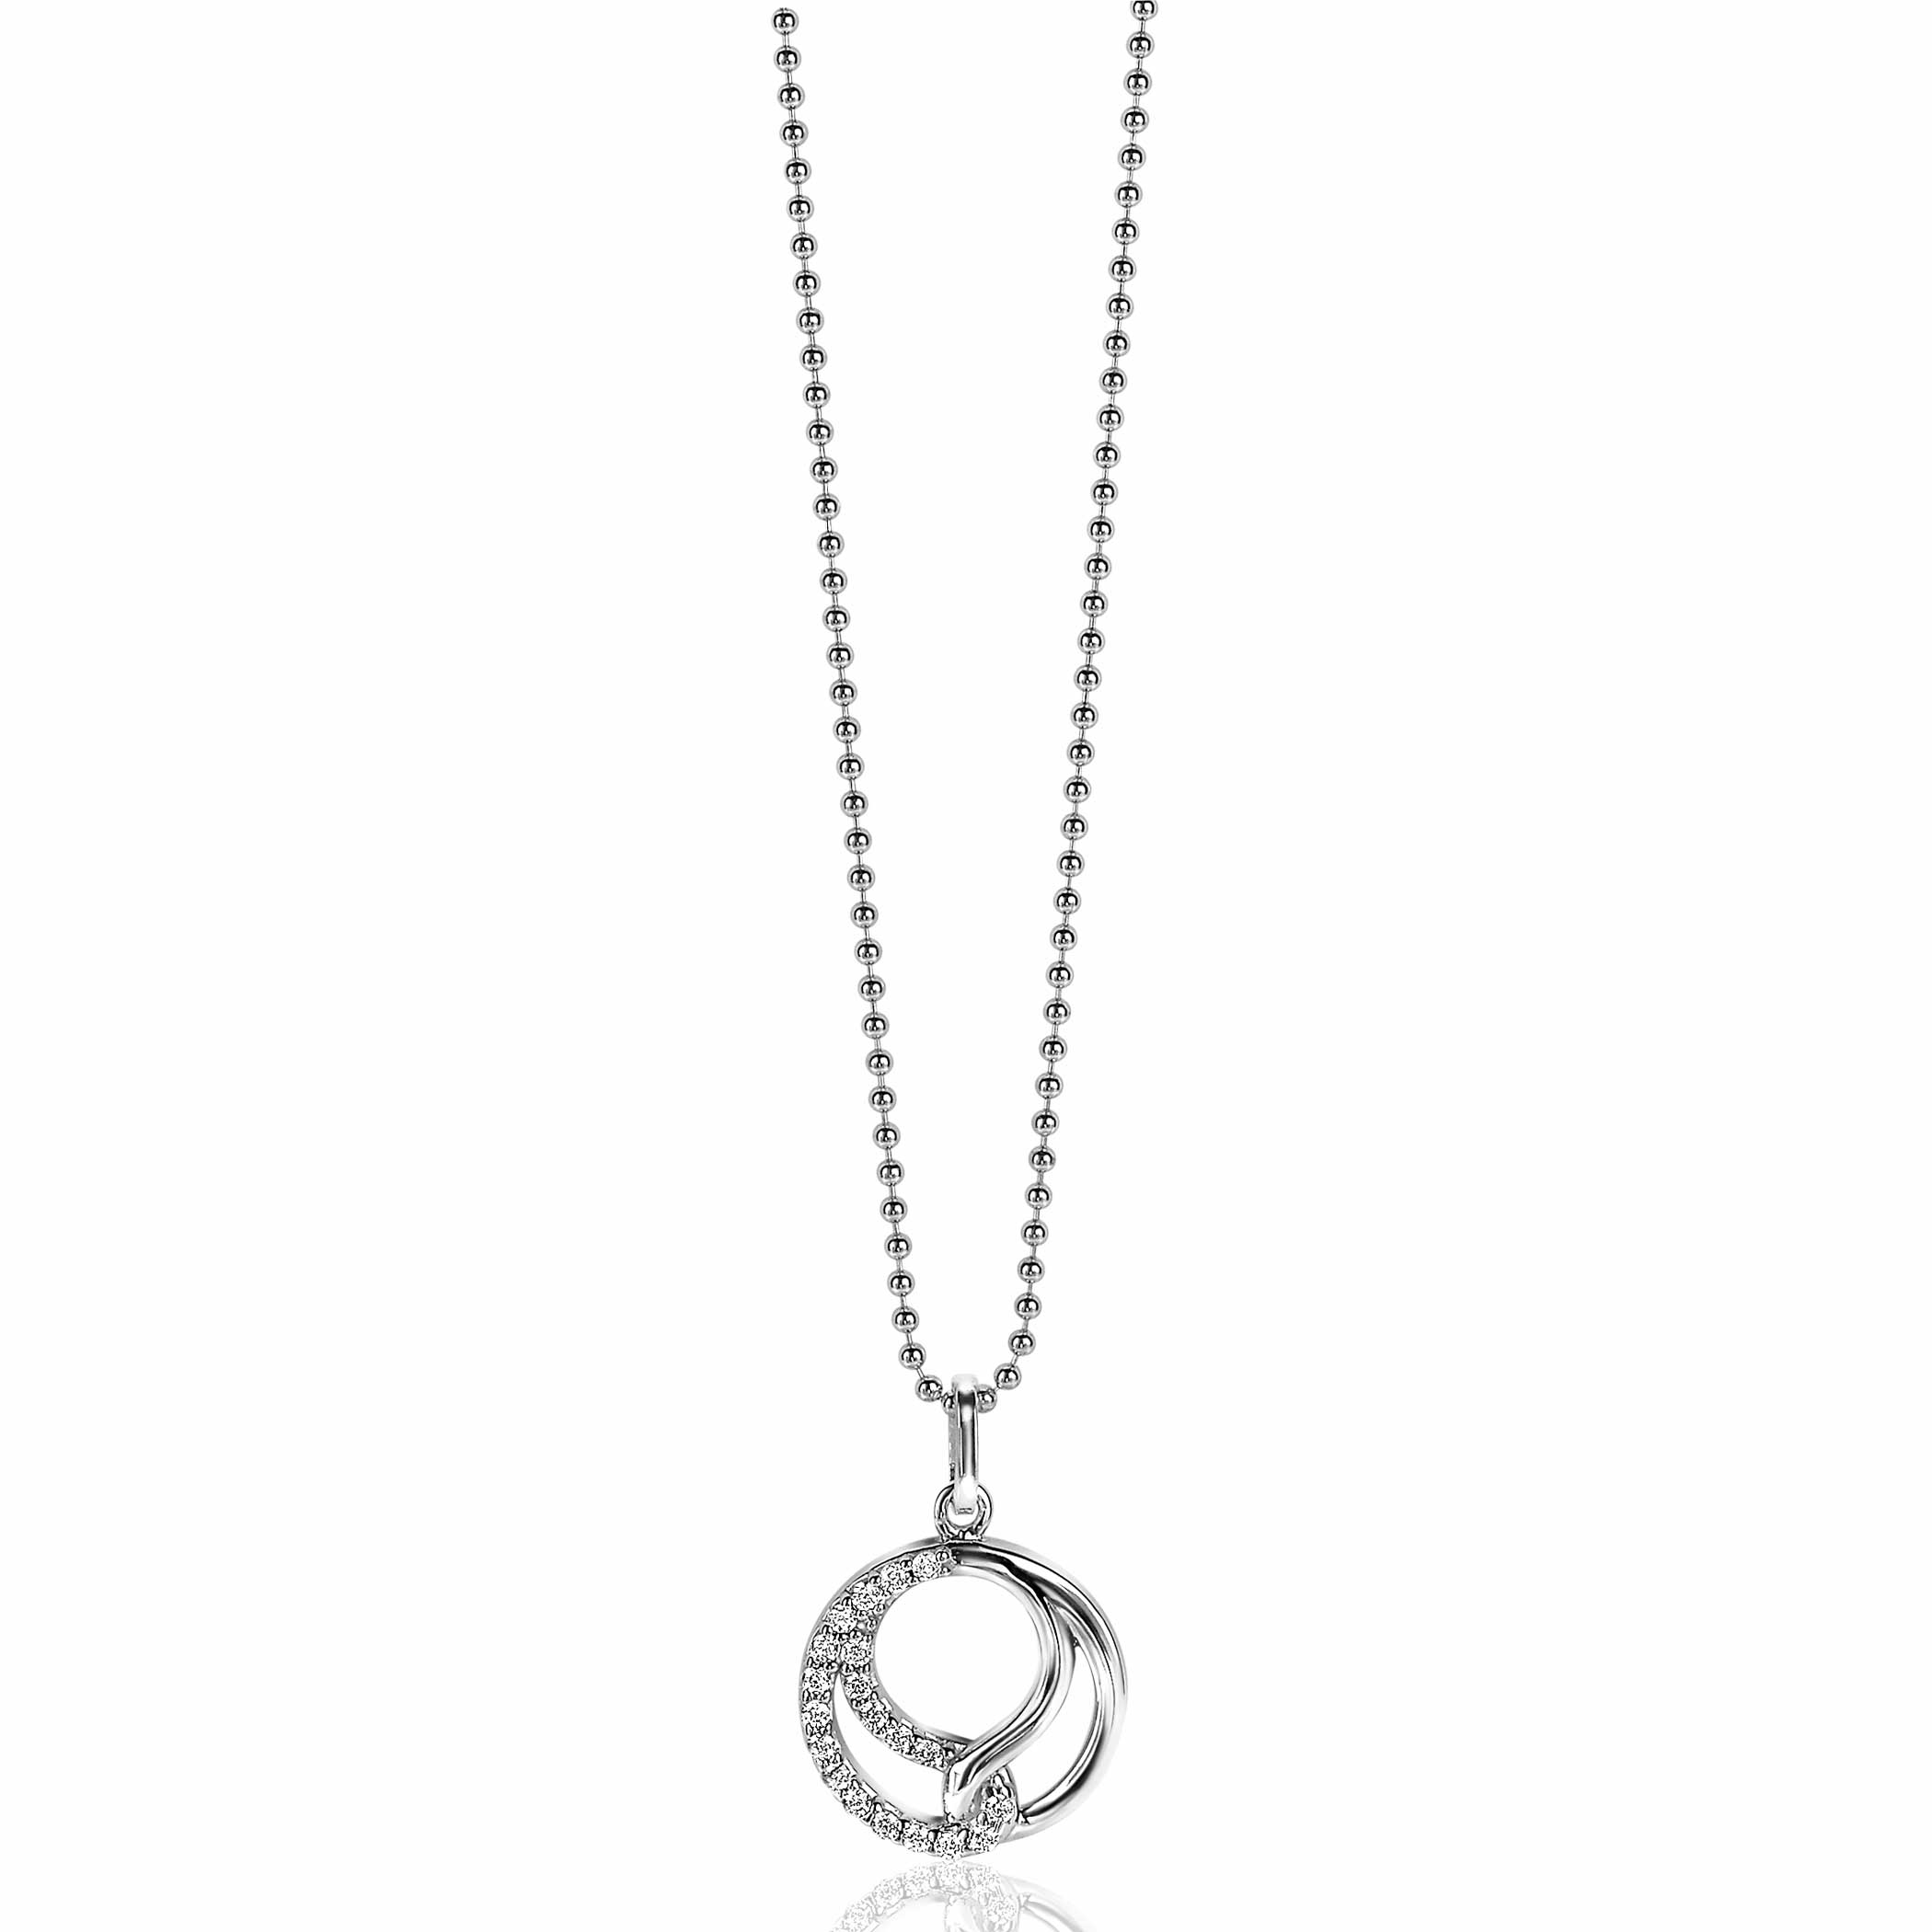 15mm ZINZI Sterling Silver Pendant with 2 Connected Shapes White Zirconias ZIH2119S (excl. necklace)